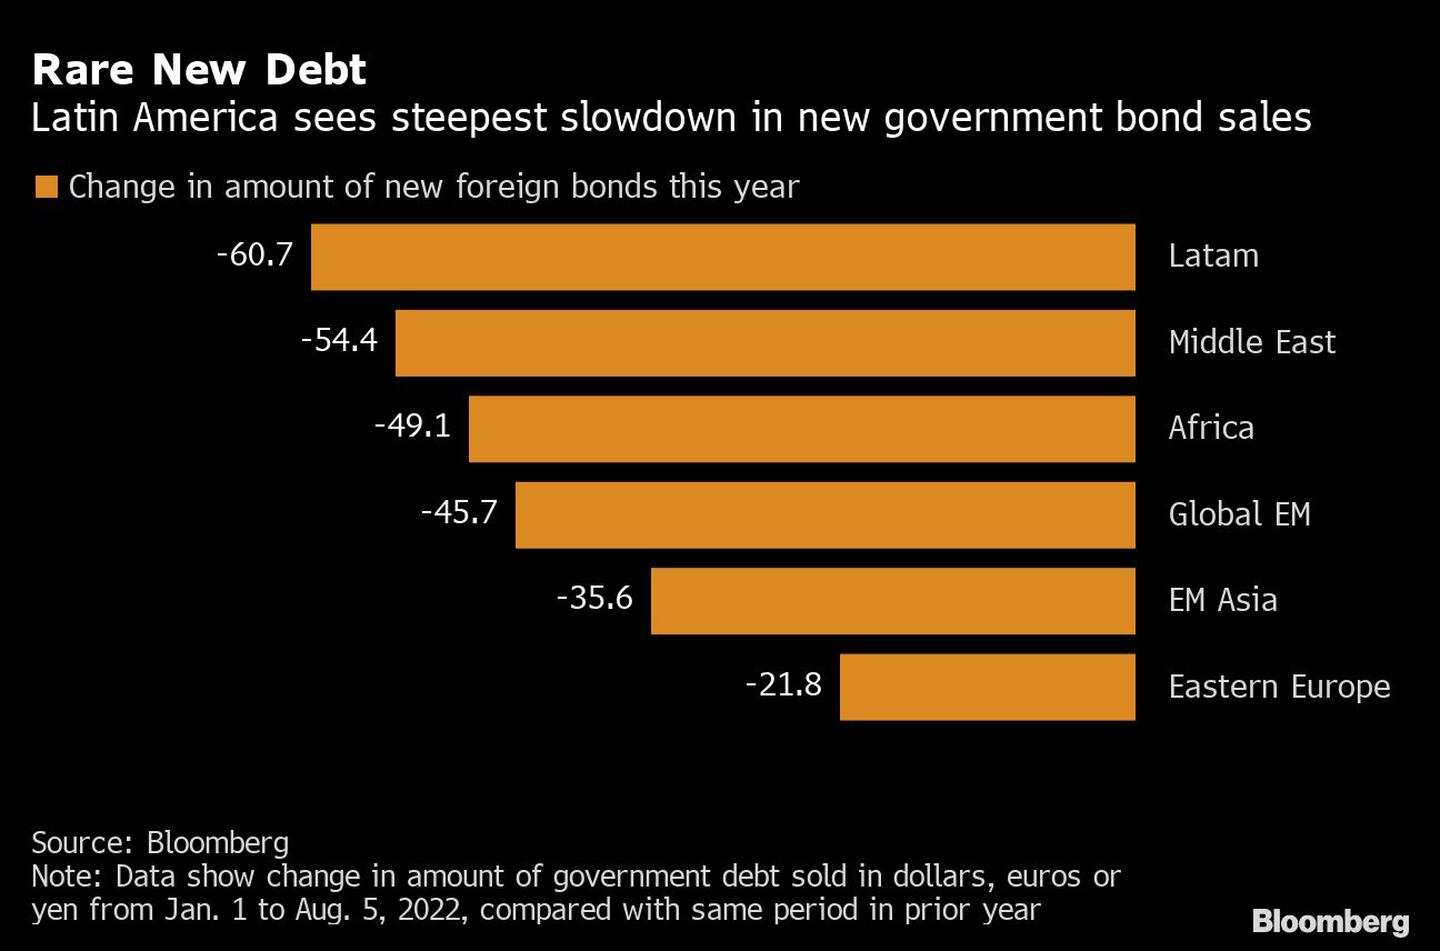 Rare New Debt | Latin America sees steepest slowdown in new government bond salesdfd